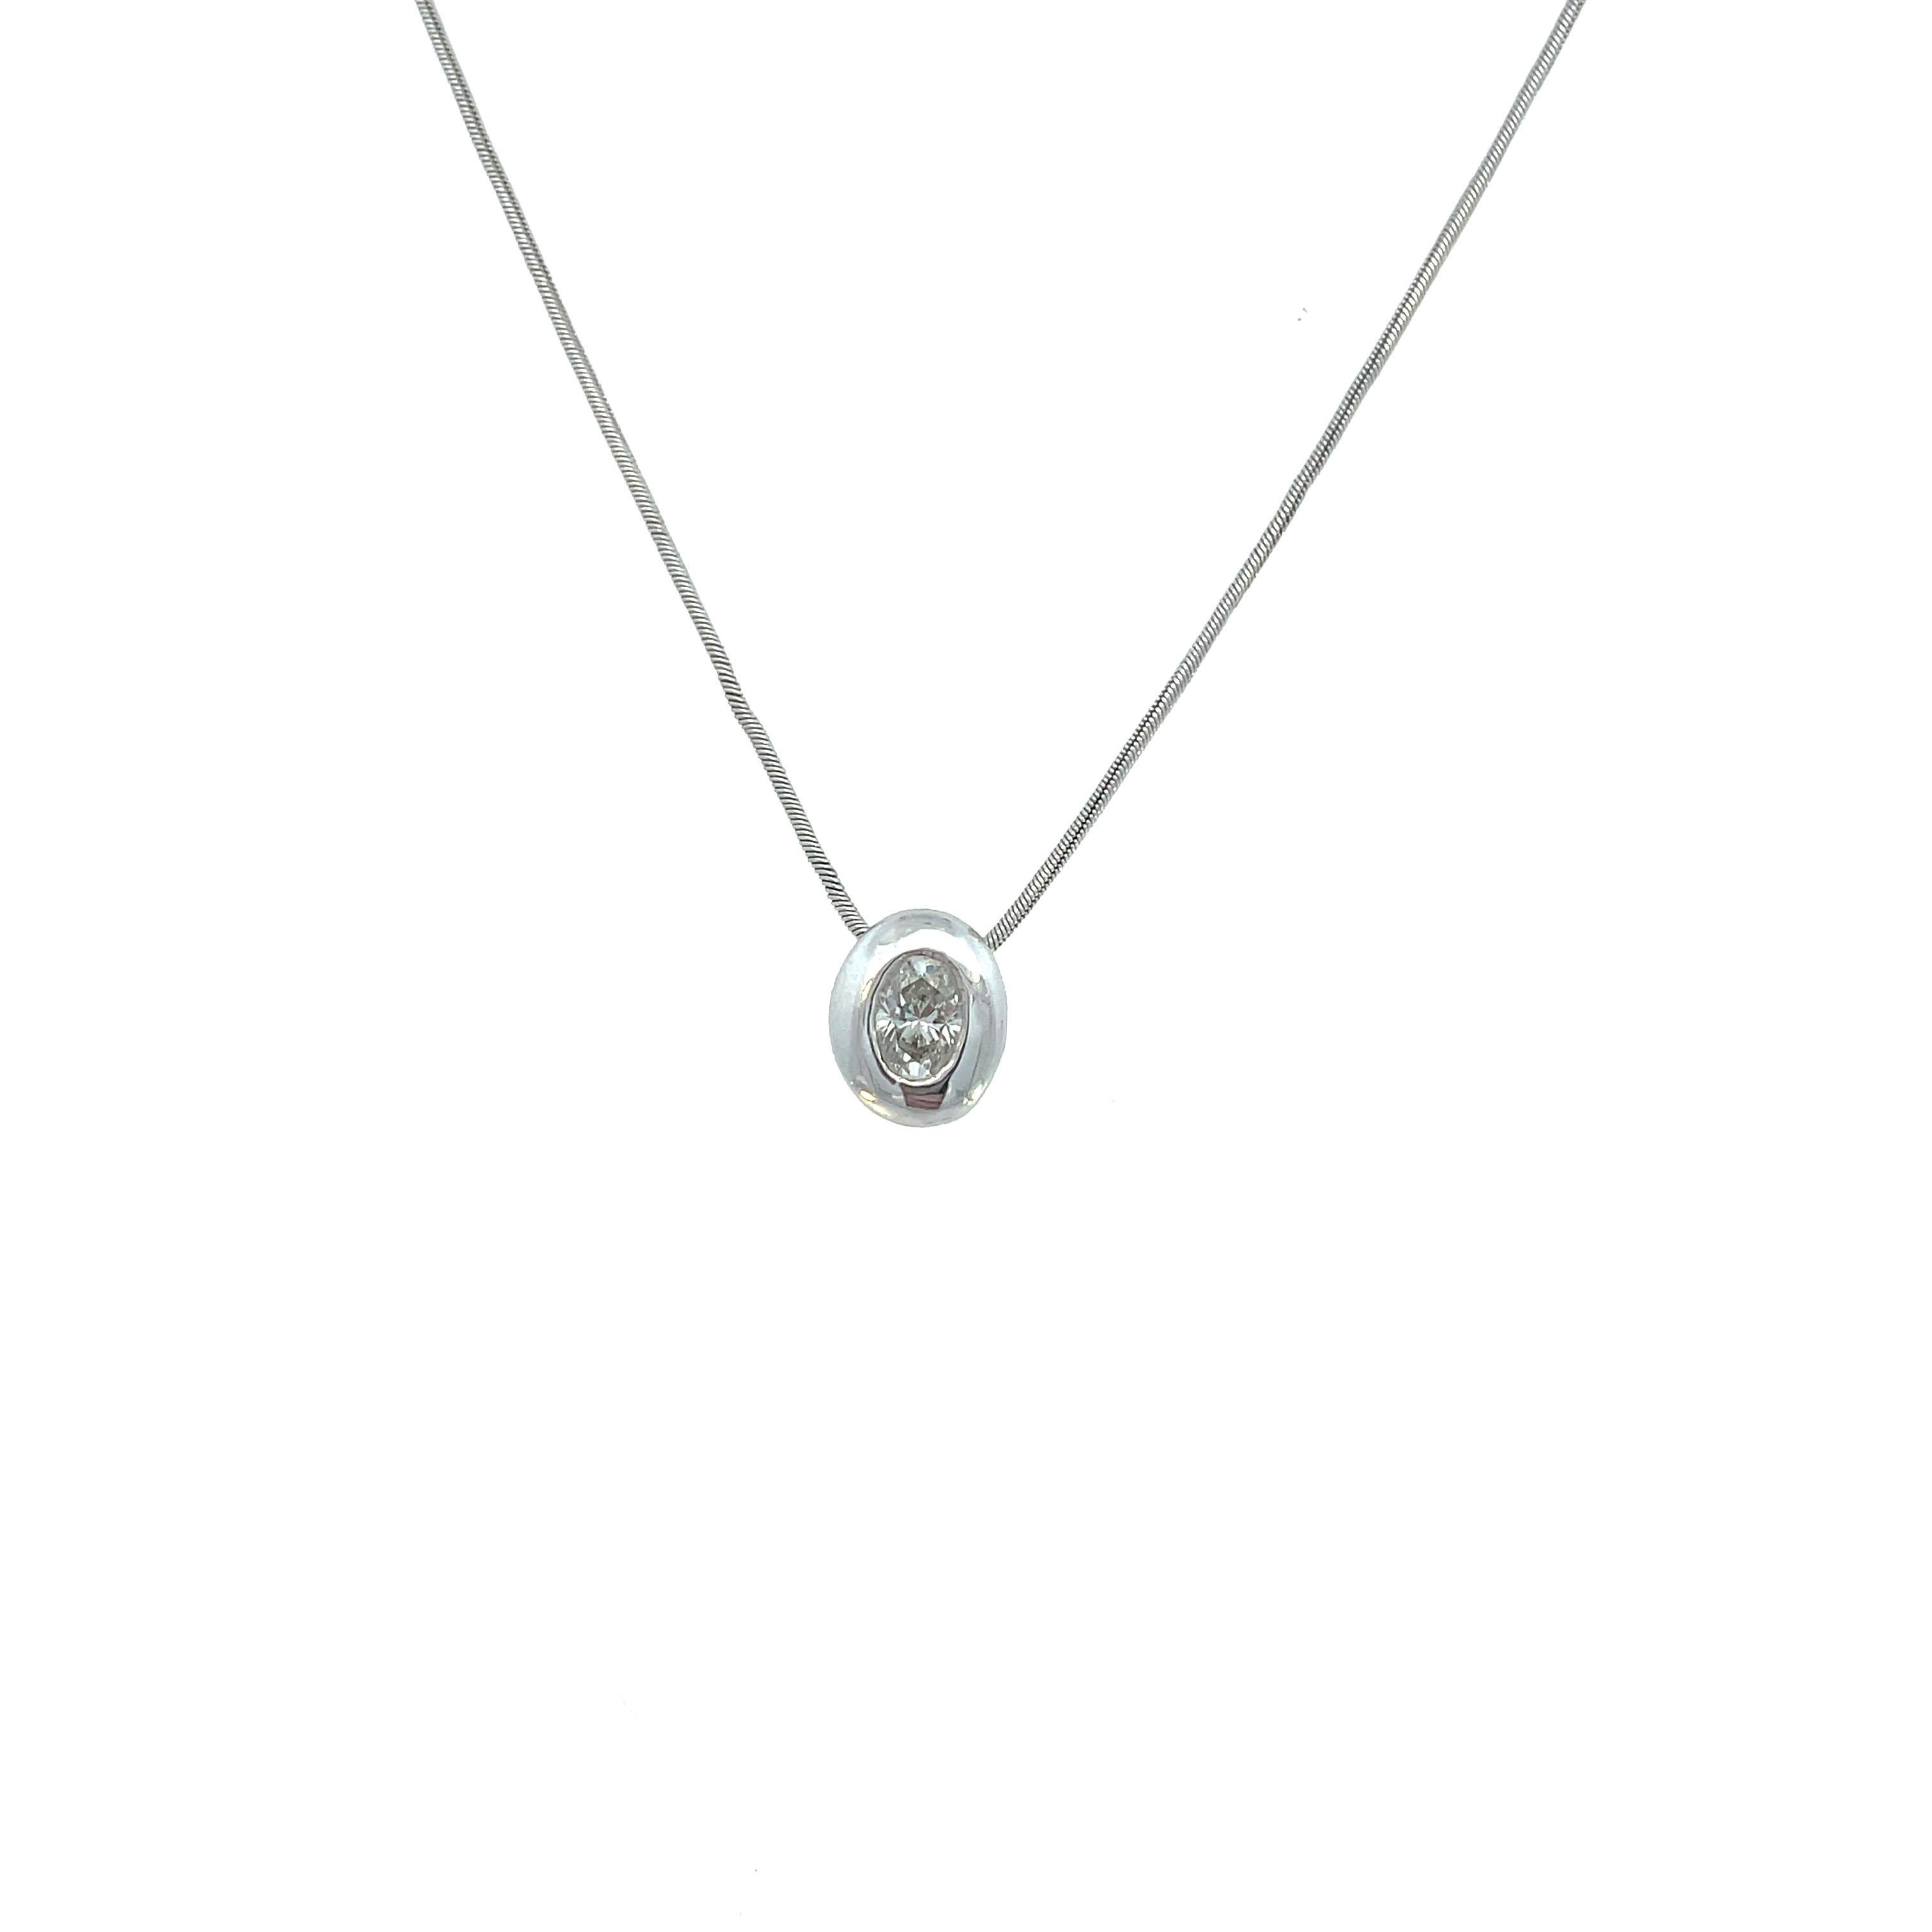 This is a classic floating bezel necklace adorned with a sparkling oval diamond at the center crafted in beaming 14K white gold. The necklace measures 20